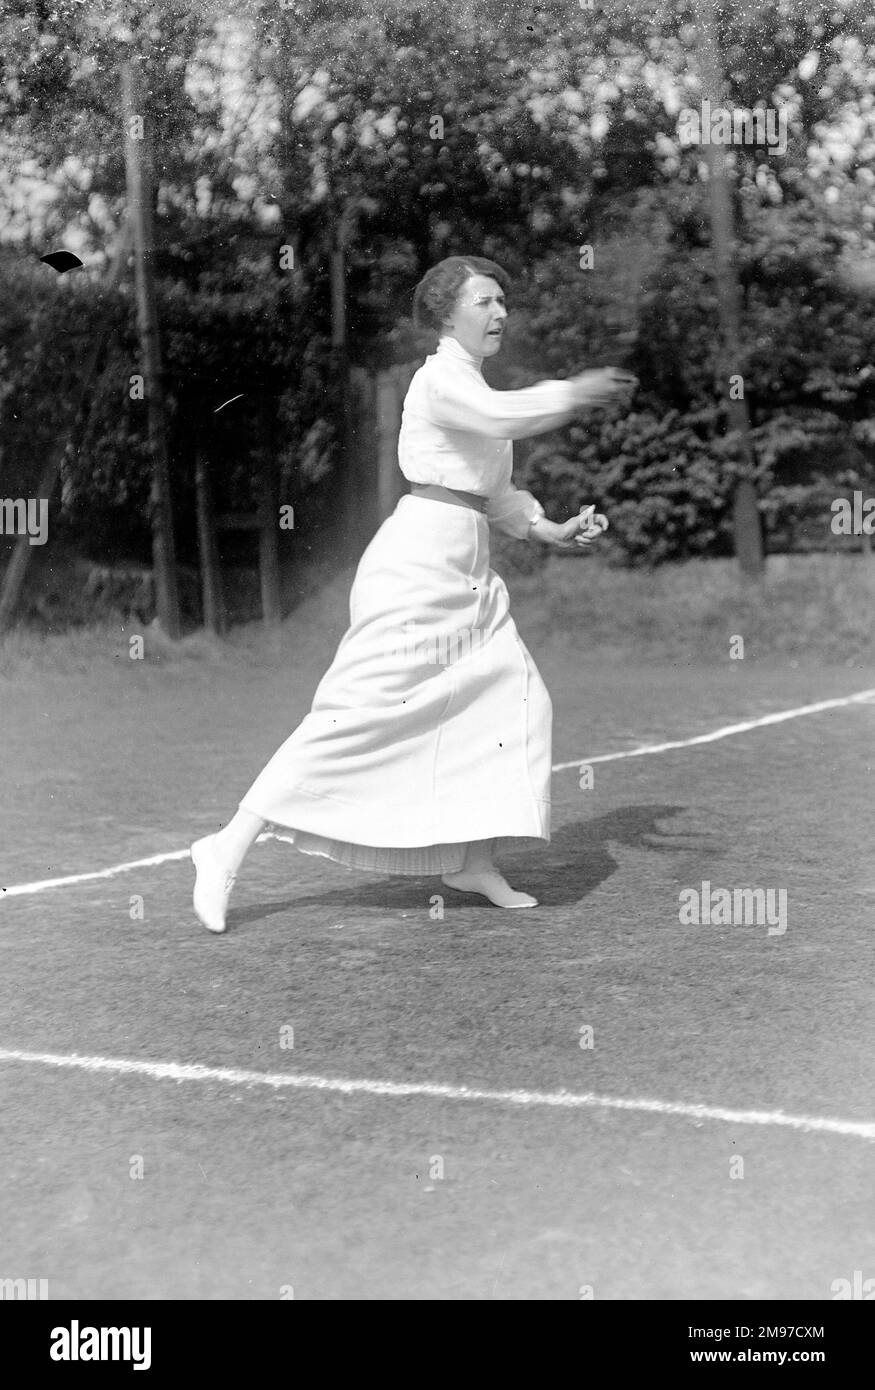 Lady Tennis player in action at Moorfield Tennis Club, Stockport, showing how the dress of the time must have restricted a keen player. Stock Photo